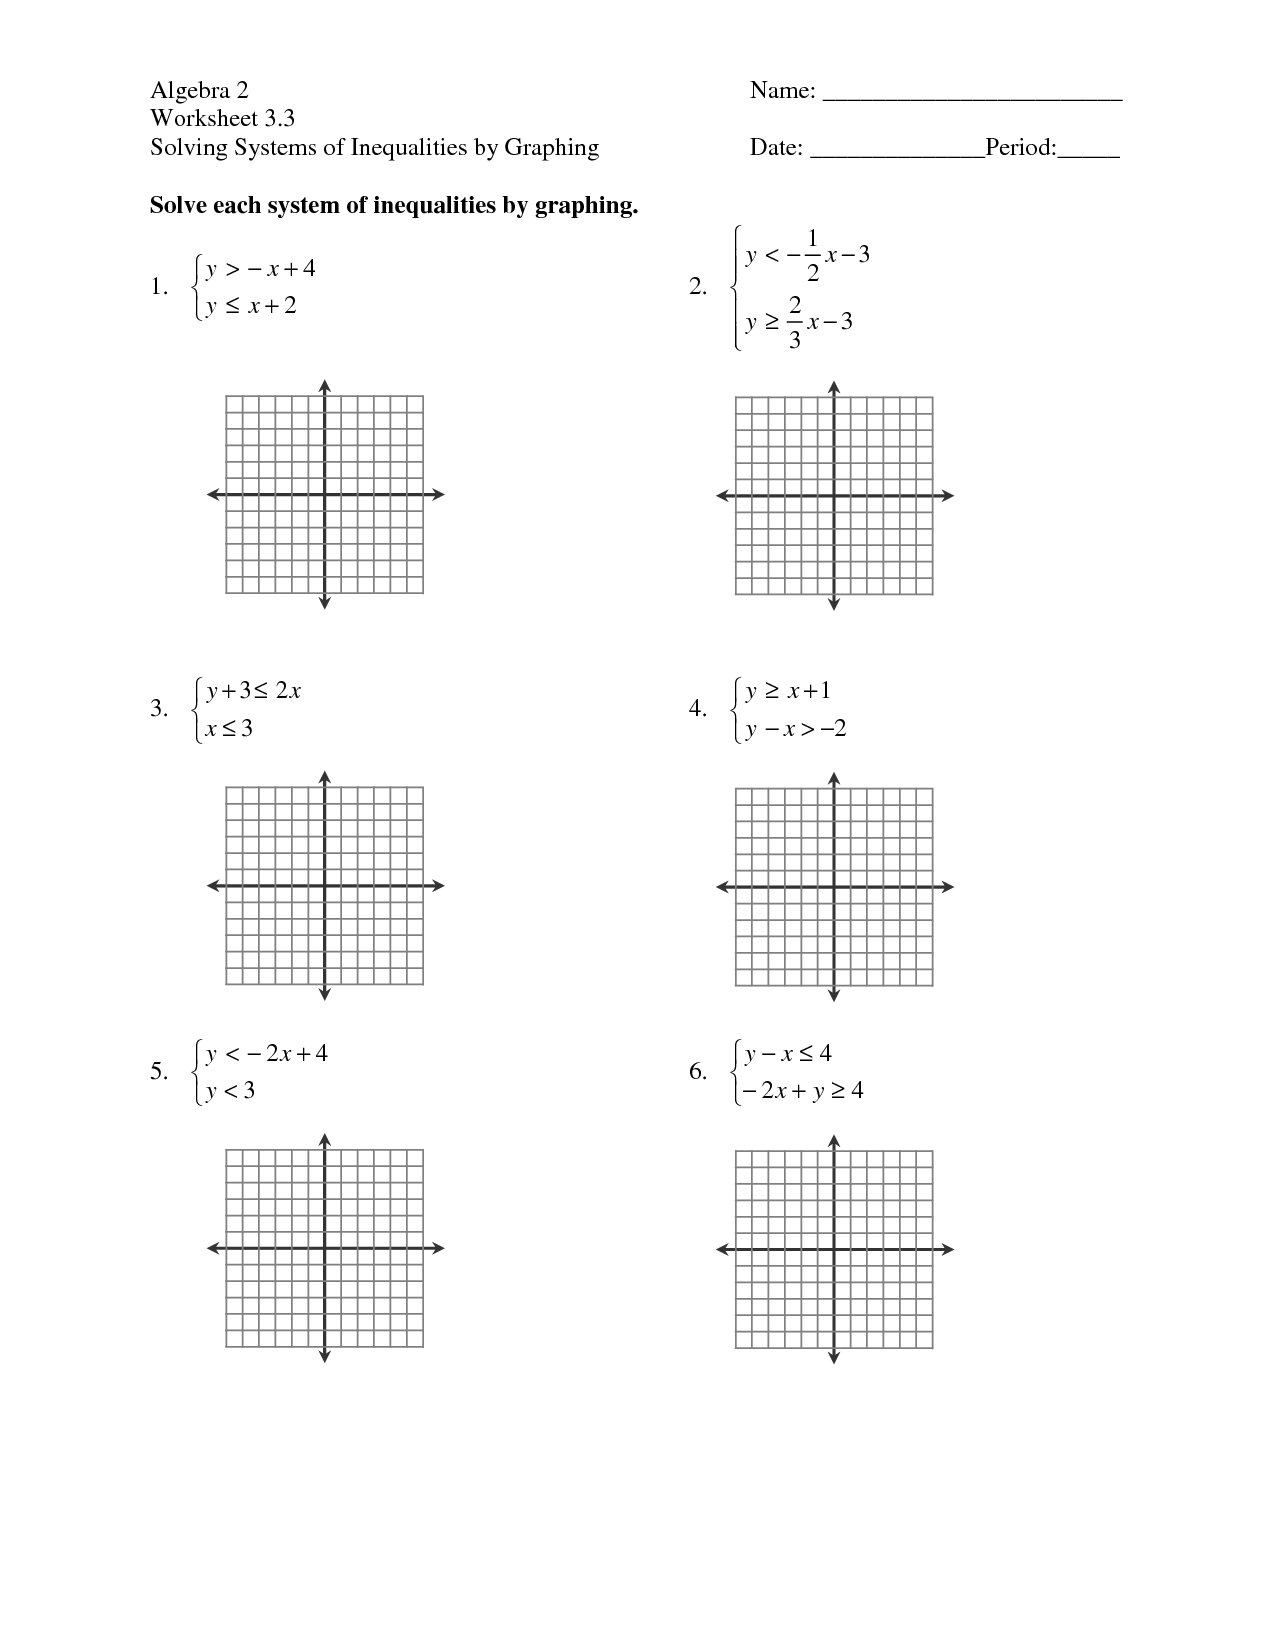 Solving Systems of Inequalities by Graphing Worksheets Image